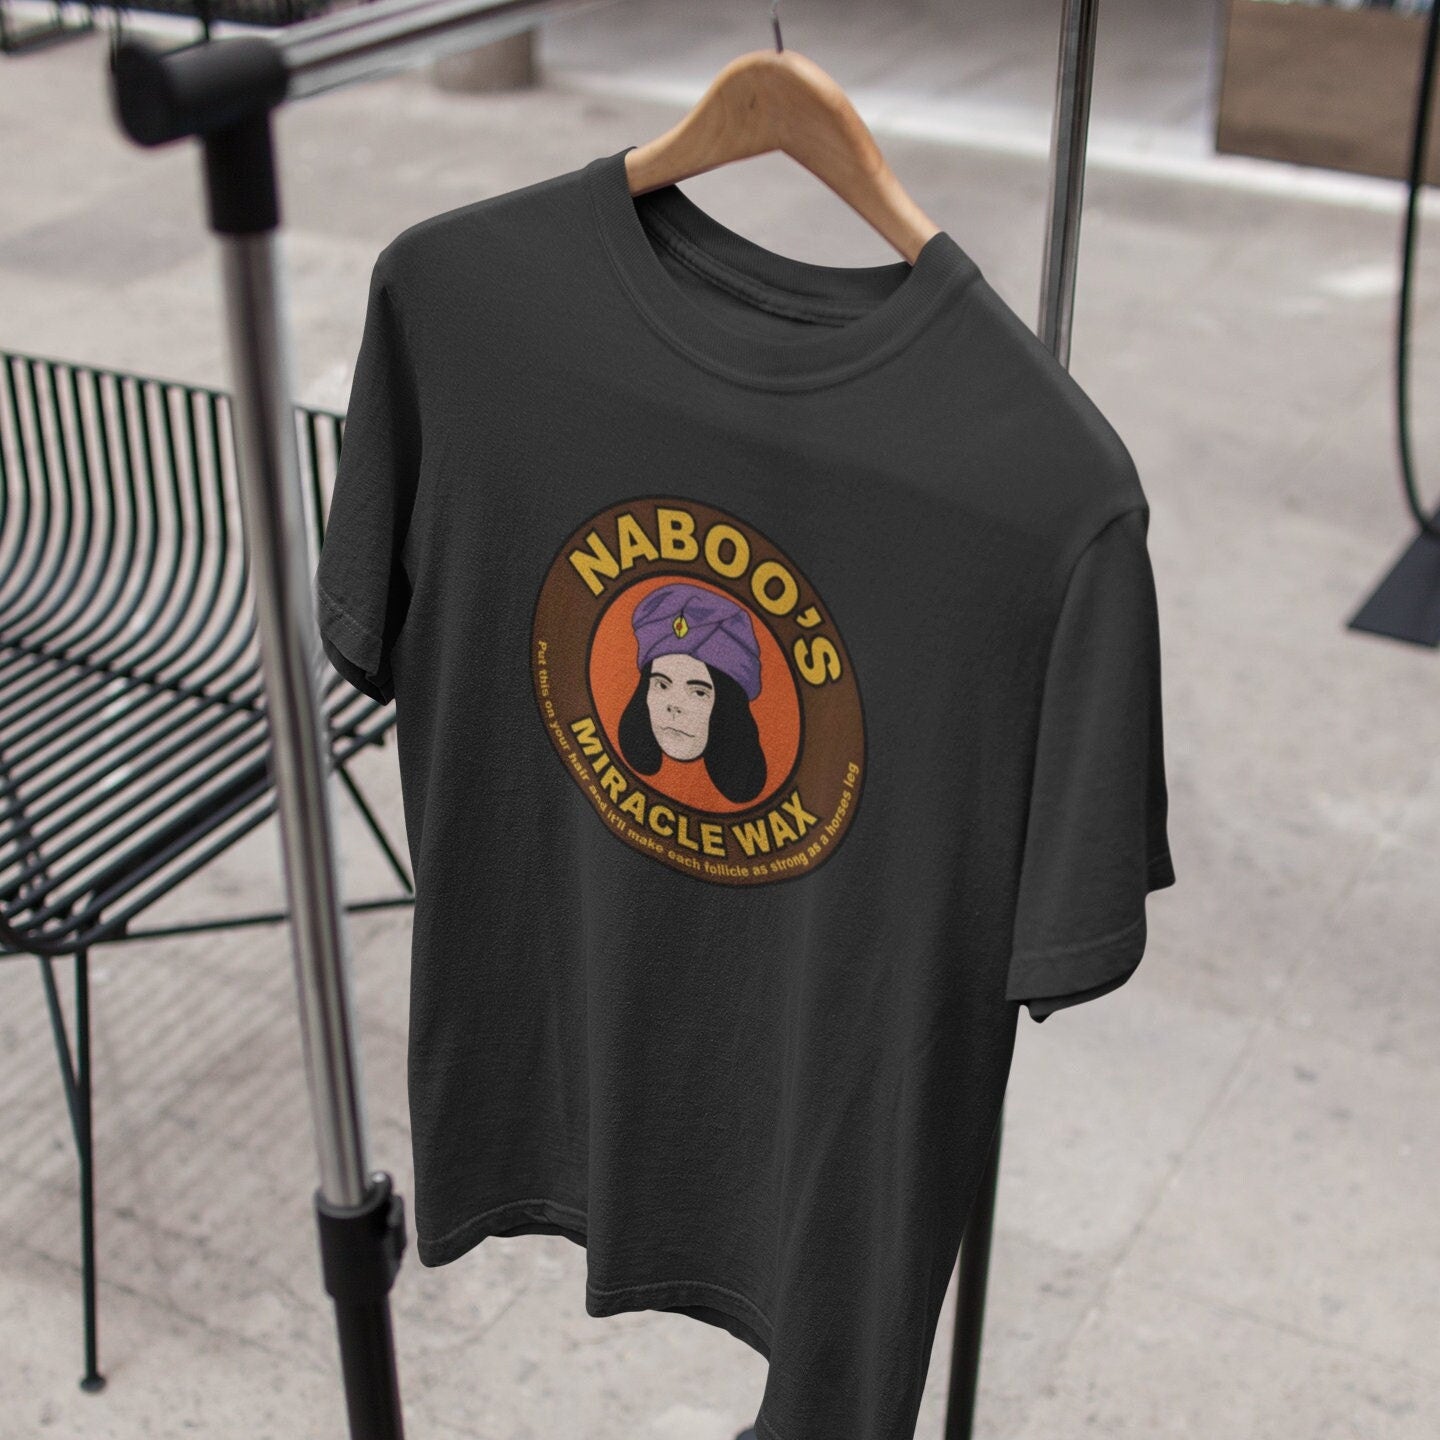 Naboo's Miracle Wax T Shirt | The Mighty Boosh | Naboo The Enigma | Fiery Biscuits | The Mighty Boosh Tv Show